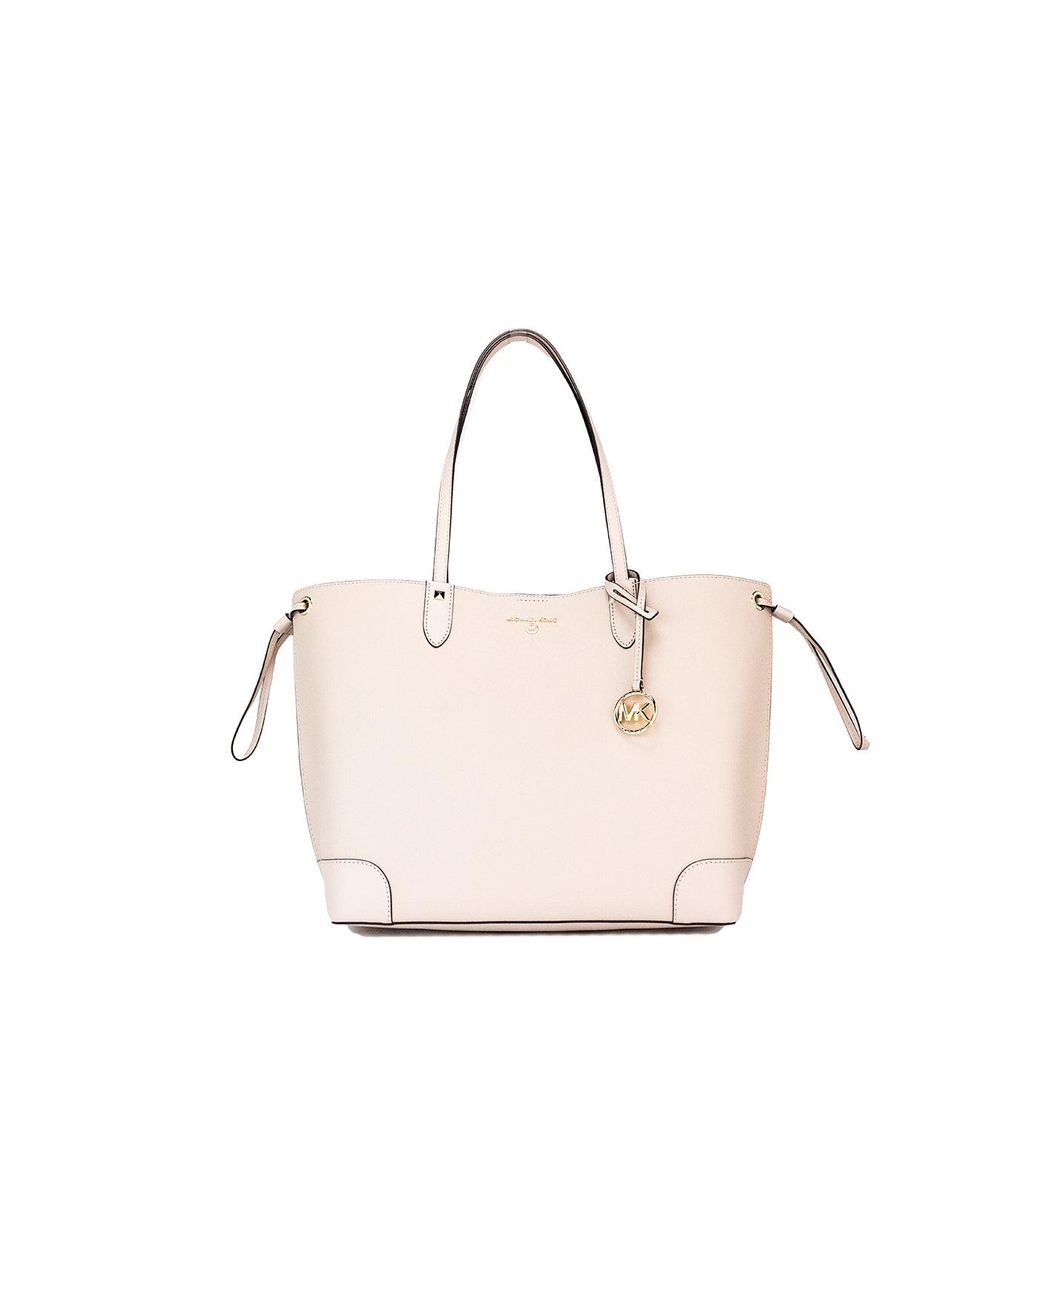 Michael Kors Edith Large Soft Pink Saffiano Leather Open Top